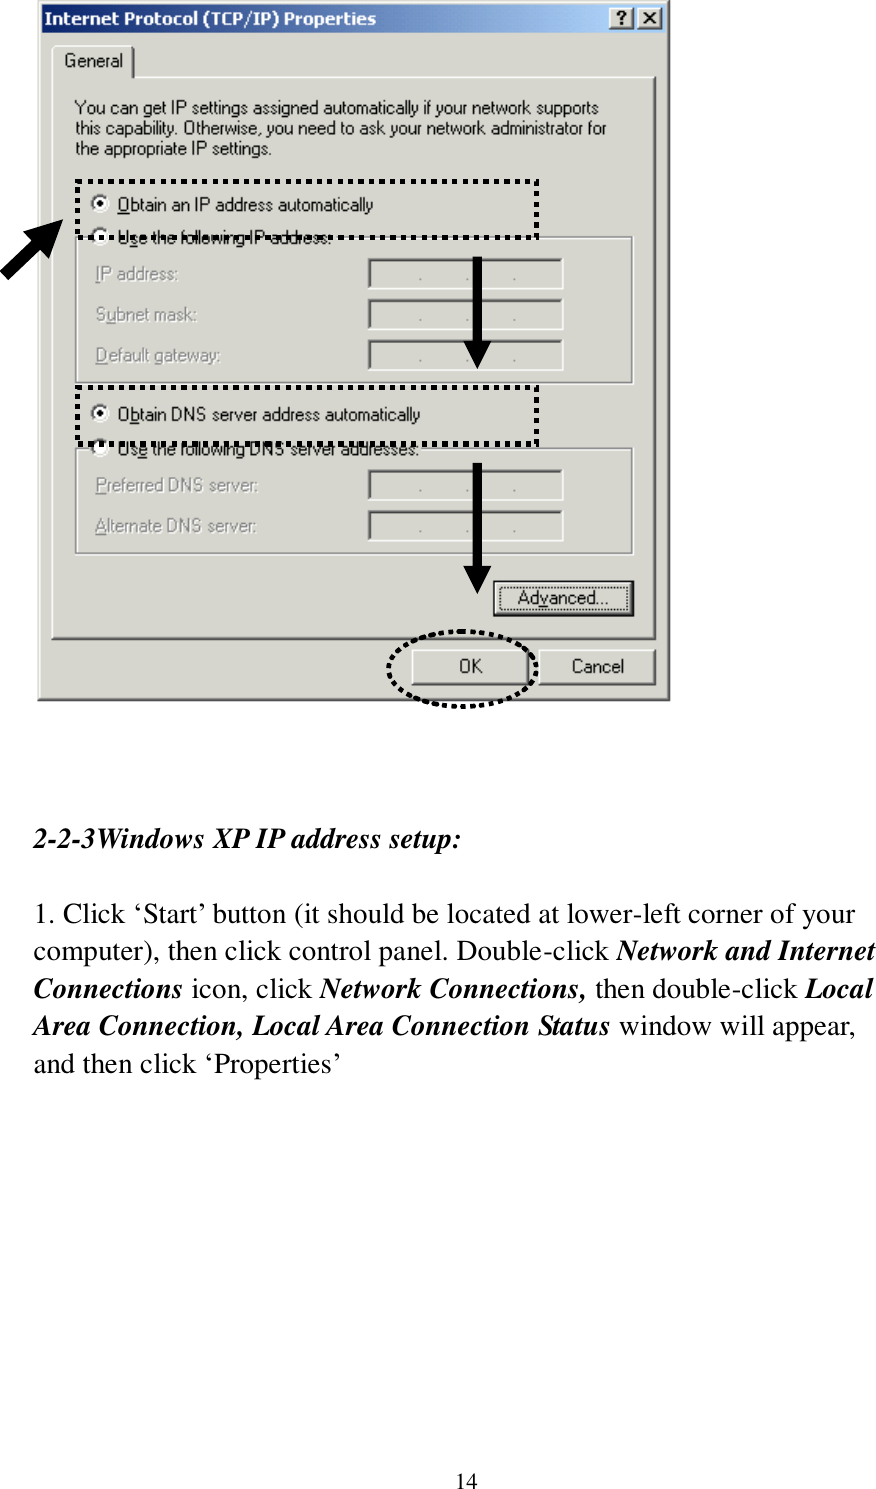 14     2-2-3Windows XP IP address setup:  1. Click „Start‟ button (it should be located at lower-left corner of your computer), then click control panel. Double-click Network and Internet Connections icon, click Network Connections, then double-click Local Area Connection, Local Area Connection Status window will appear, and then click „Properties‟  